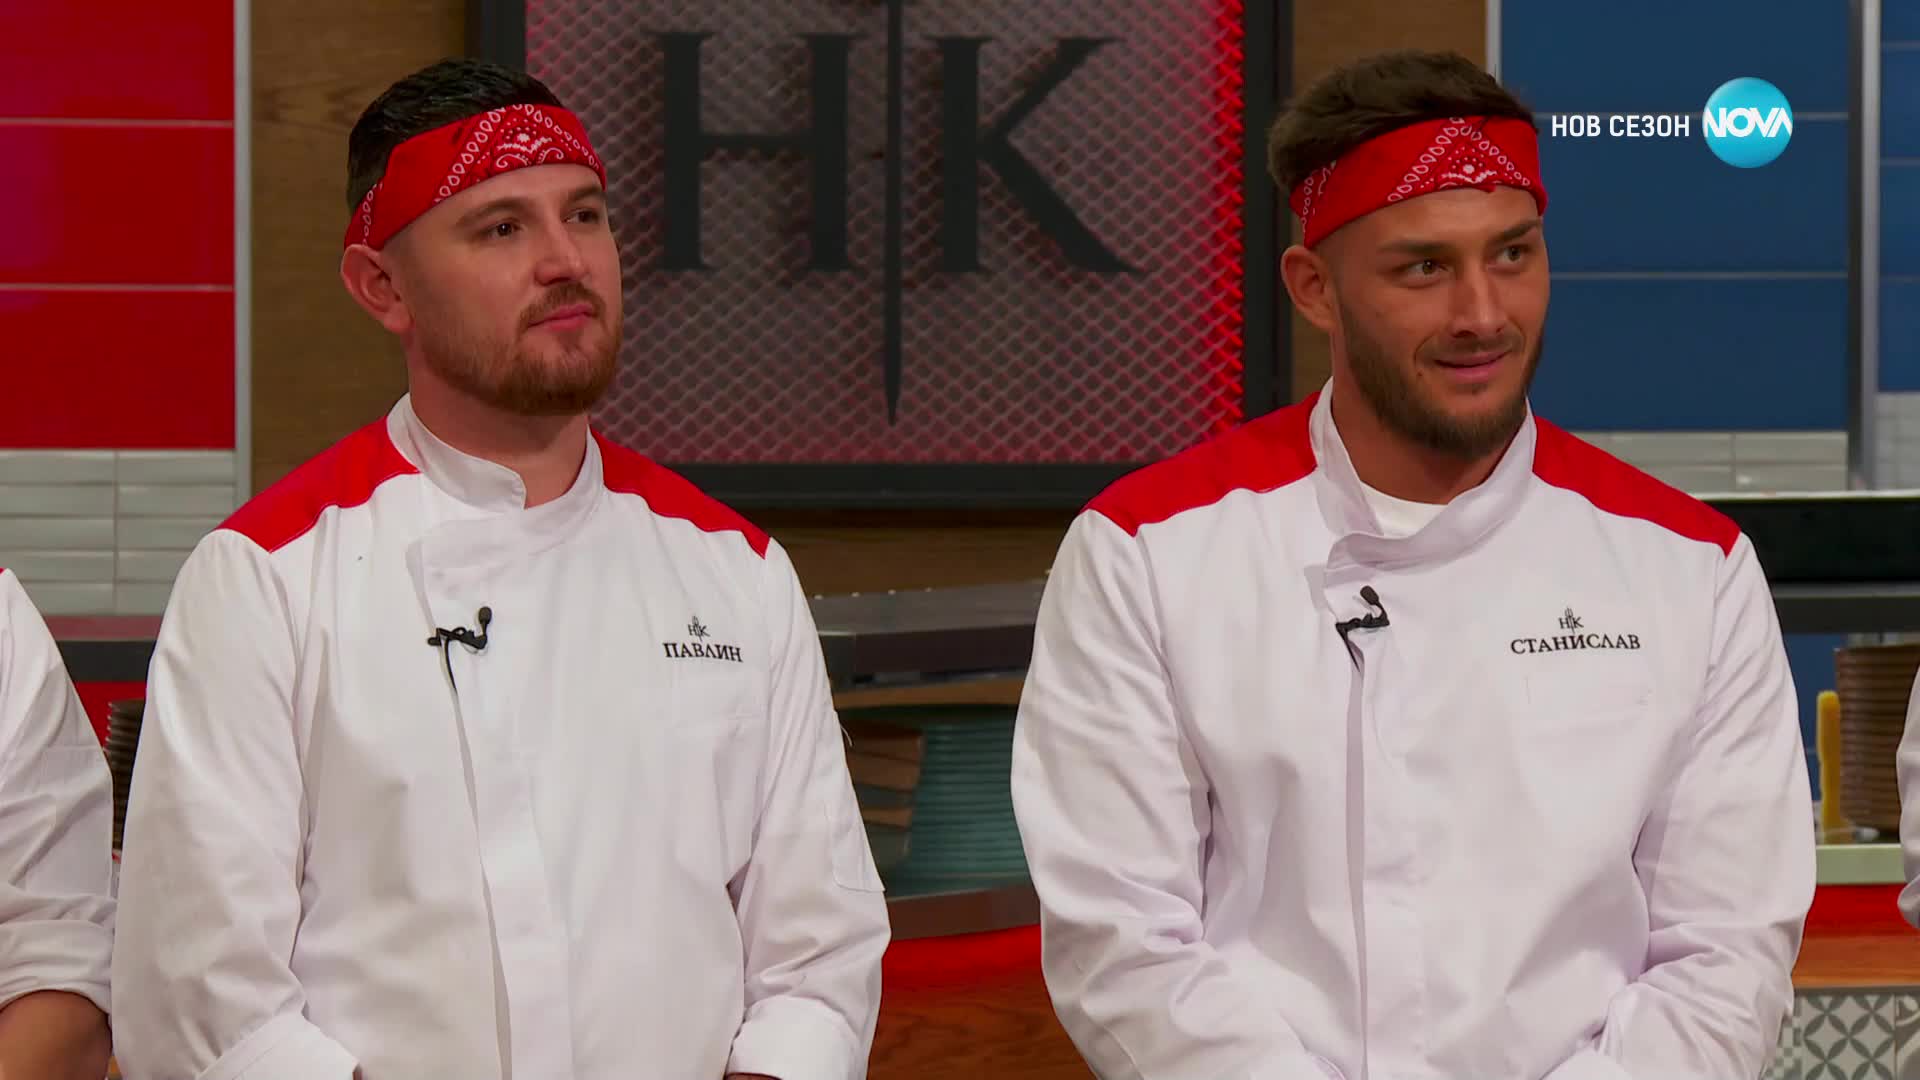 Кои звезди влизат в Hell's Kitchen? - Hell's Kitchen (20.02.2023)